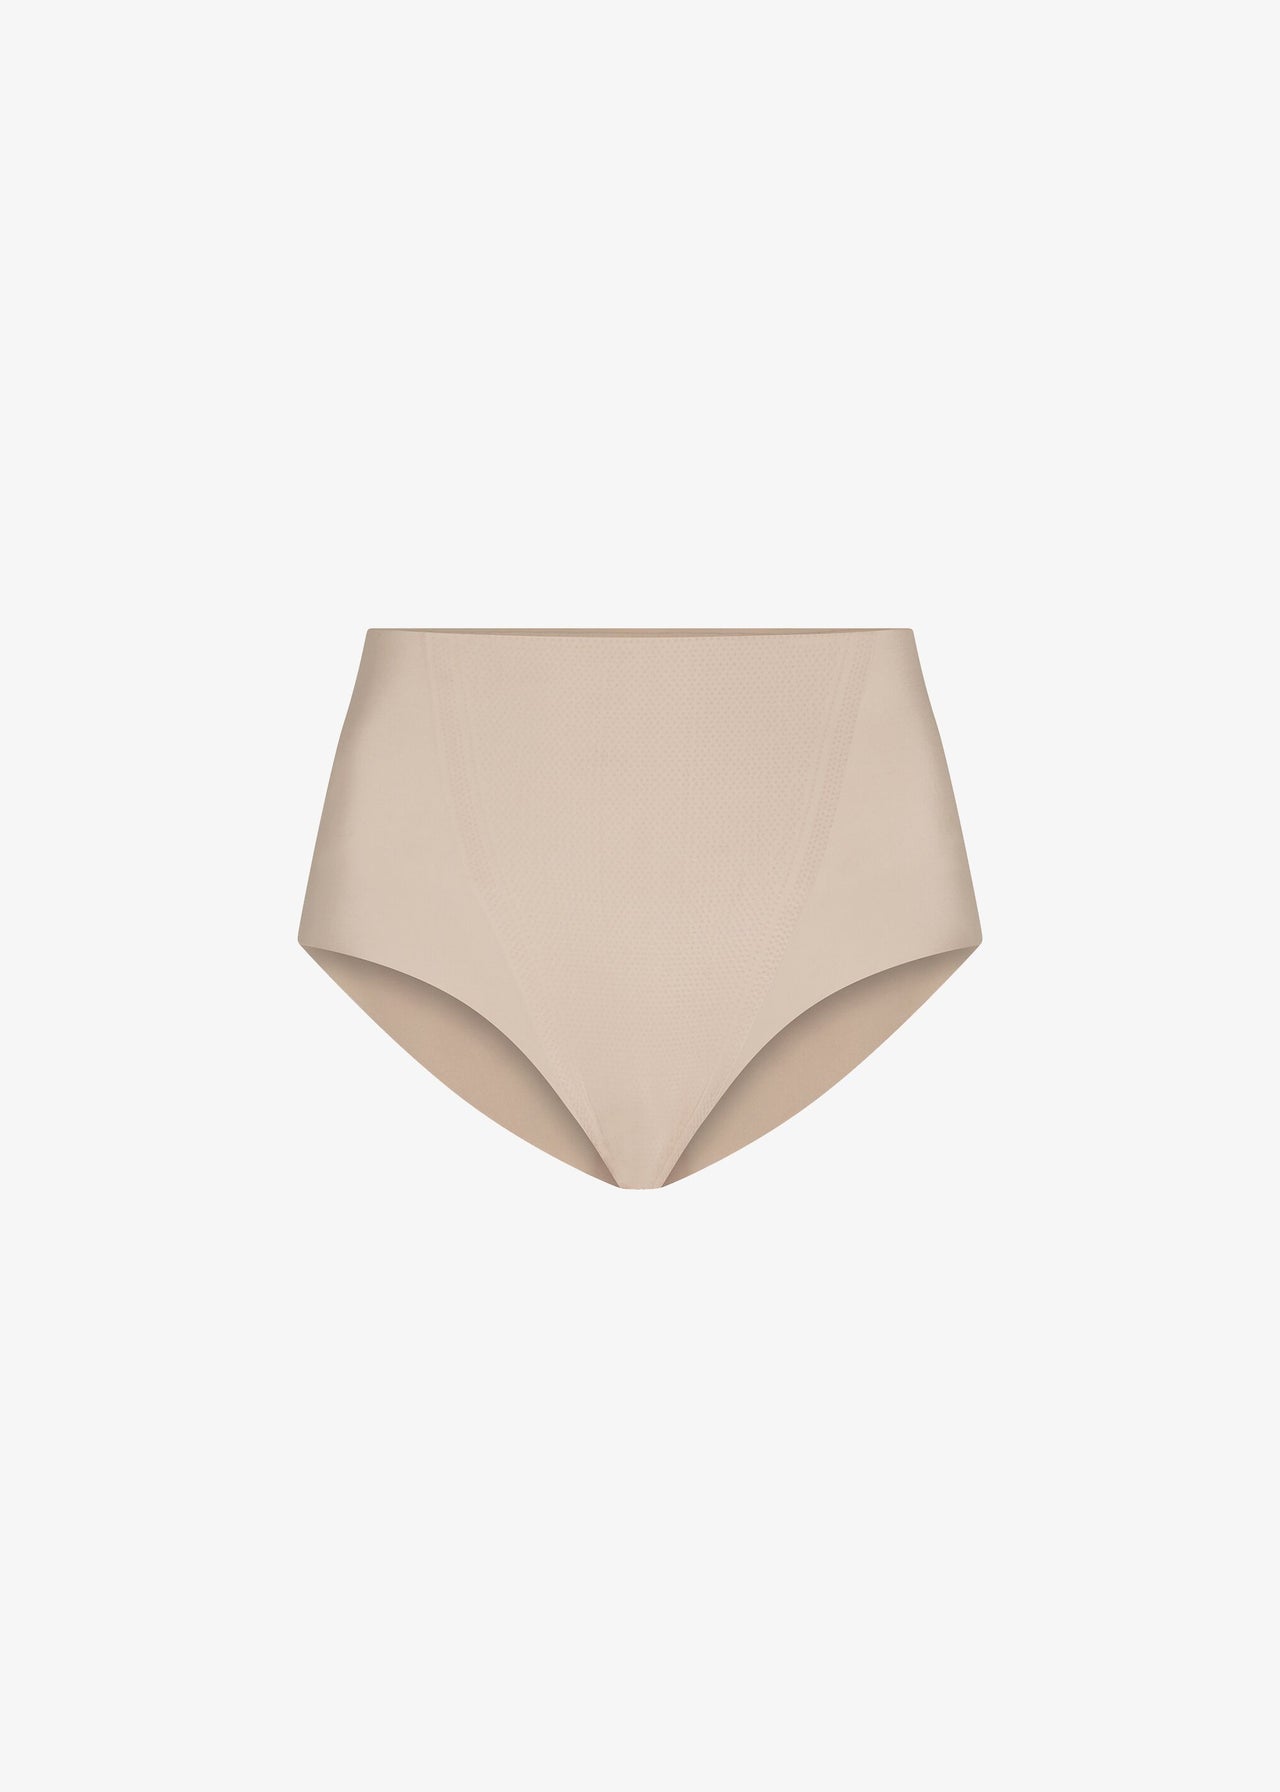 Commando Zone Smoothing Thong in Beige